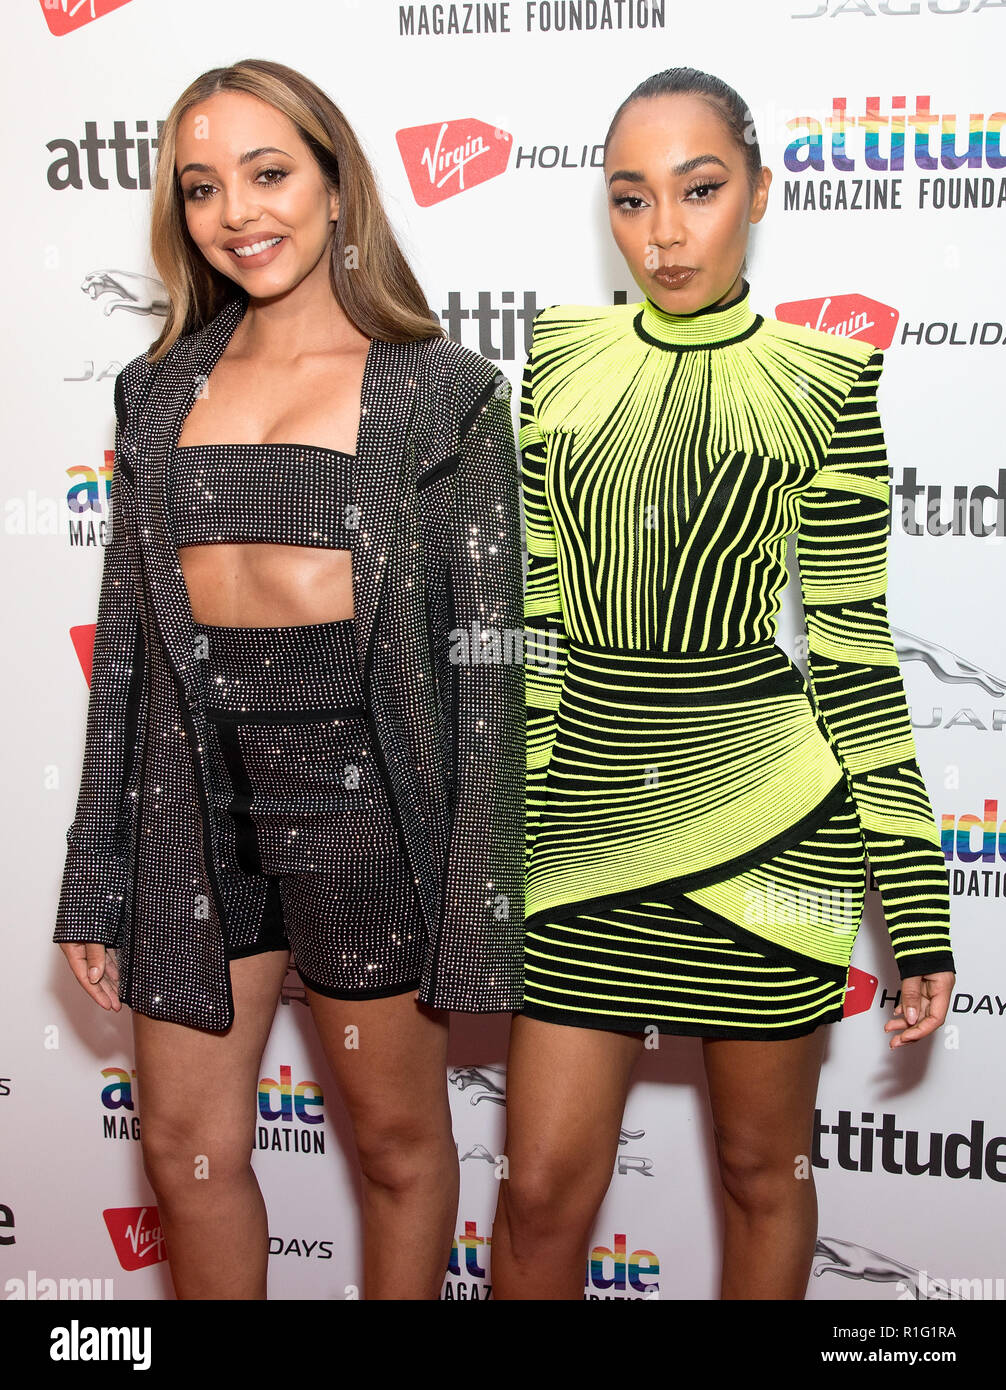 The Attitude Awards 2018 - Arrivals  Featuring: Jade Thirlwall, Leigh-Anne Pinnock Where: London, United Kingdom When: 11 Oct 2018 Credit: WENN.com Stock Photo